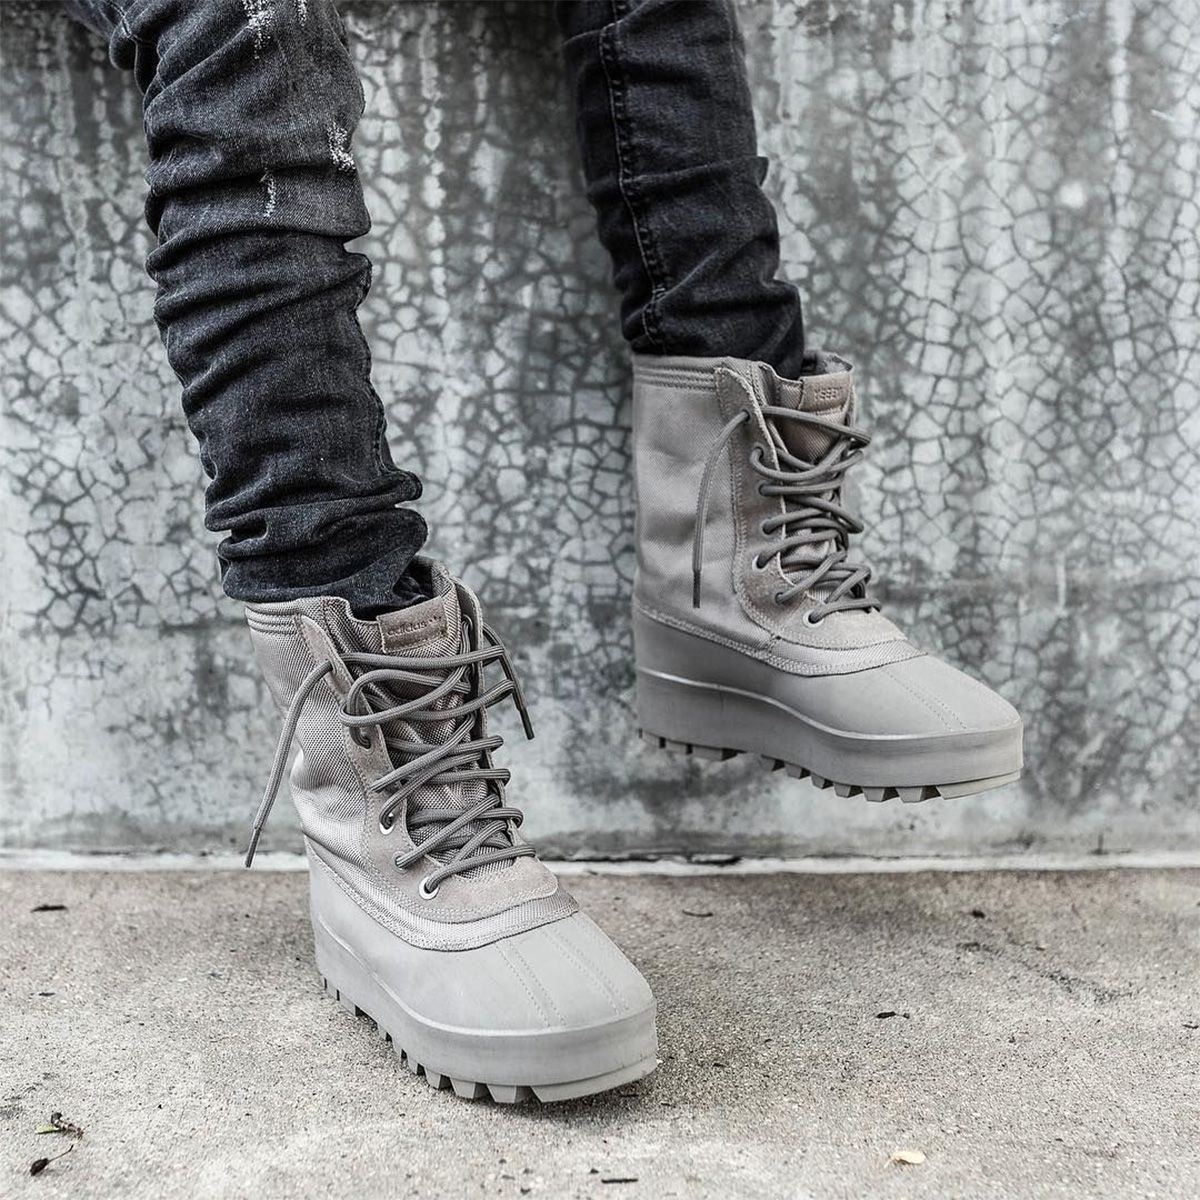 adidas YEEZY 950 Boot Returning in 2023 | House of Heat°